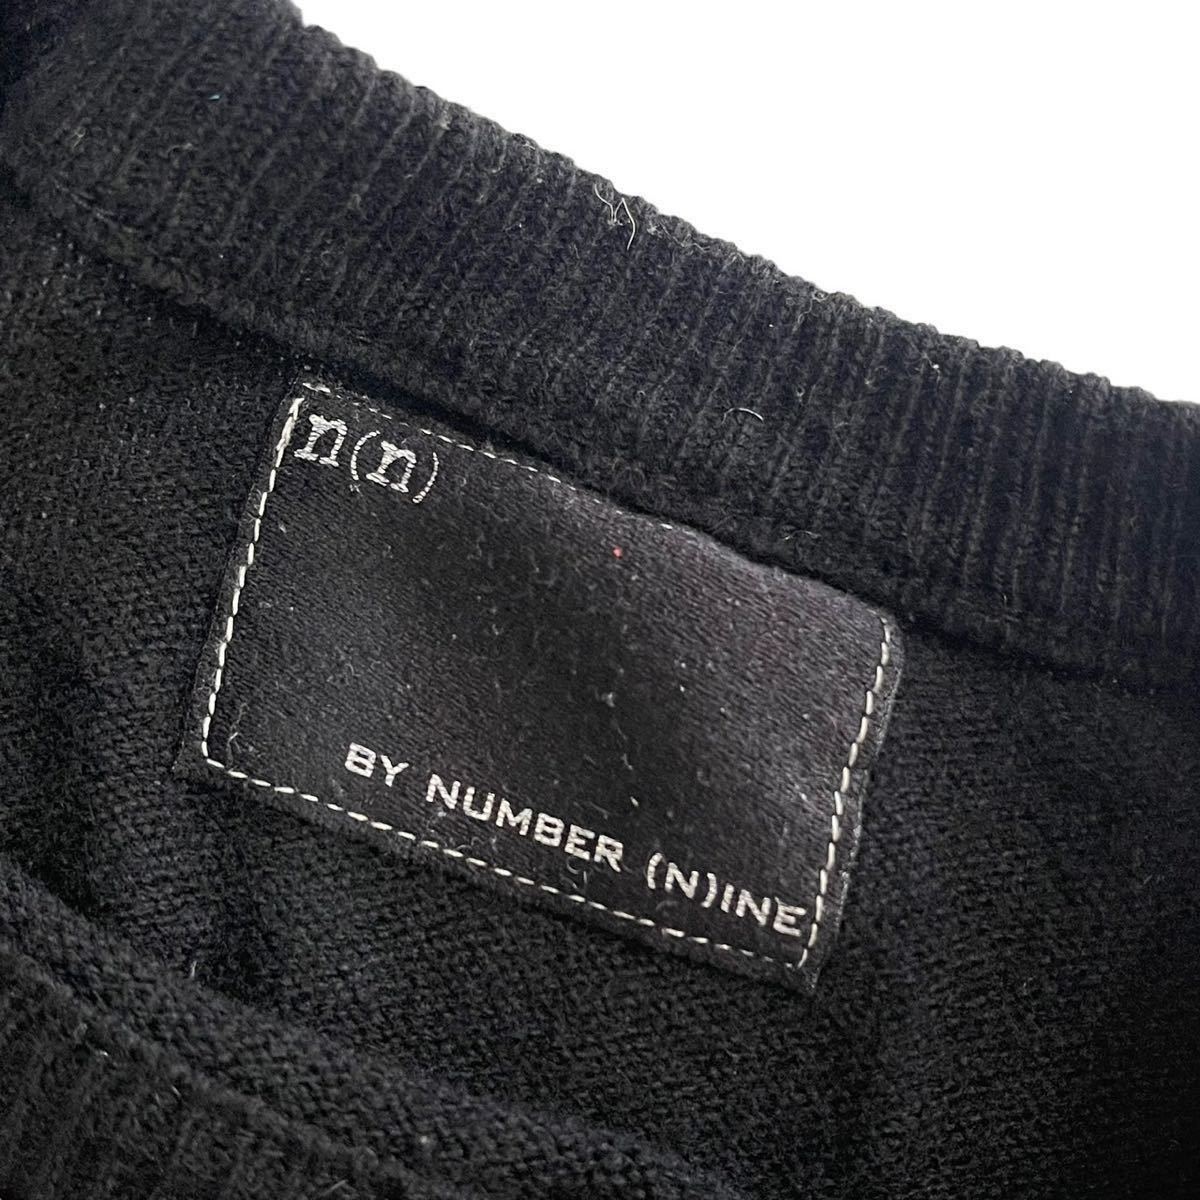 00s n(n) by Number Nine switched knit sweater エヌエヌ ナンバーナイン 生地切り替え ニット セーター Archive アーカイブ Collection _画像5